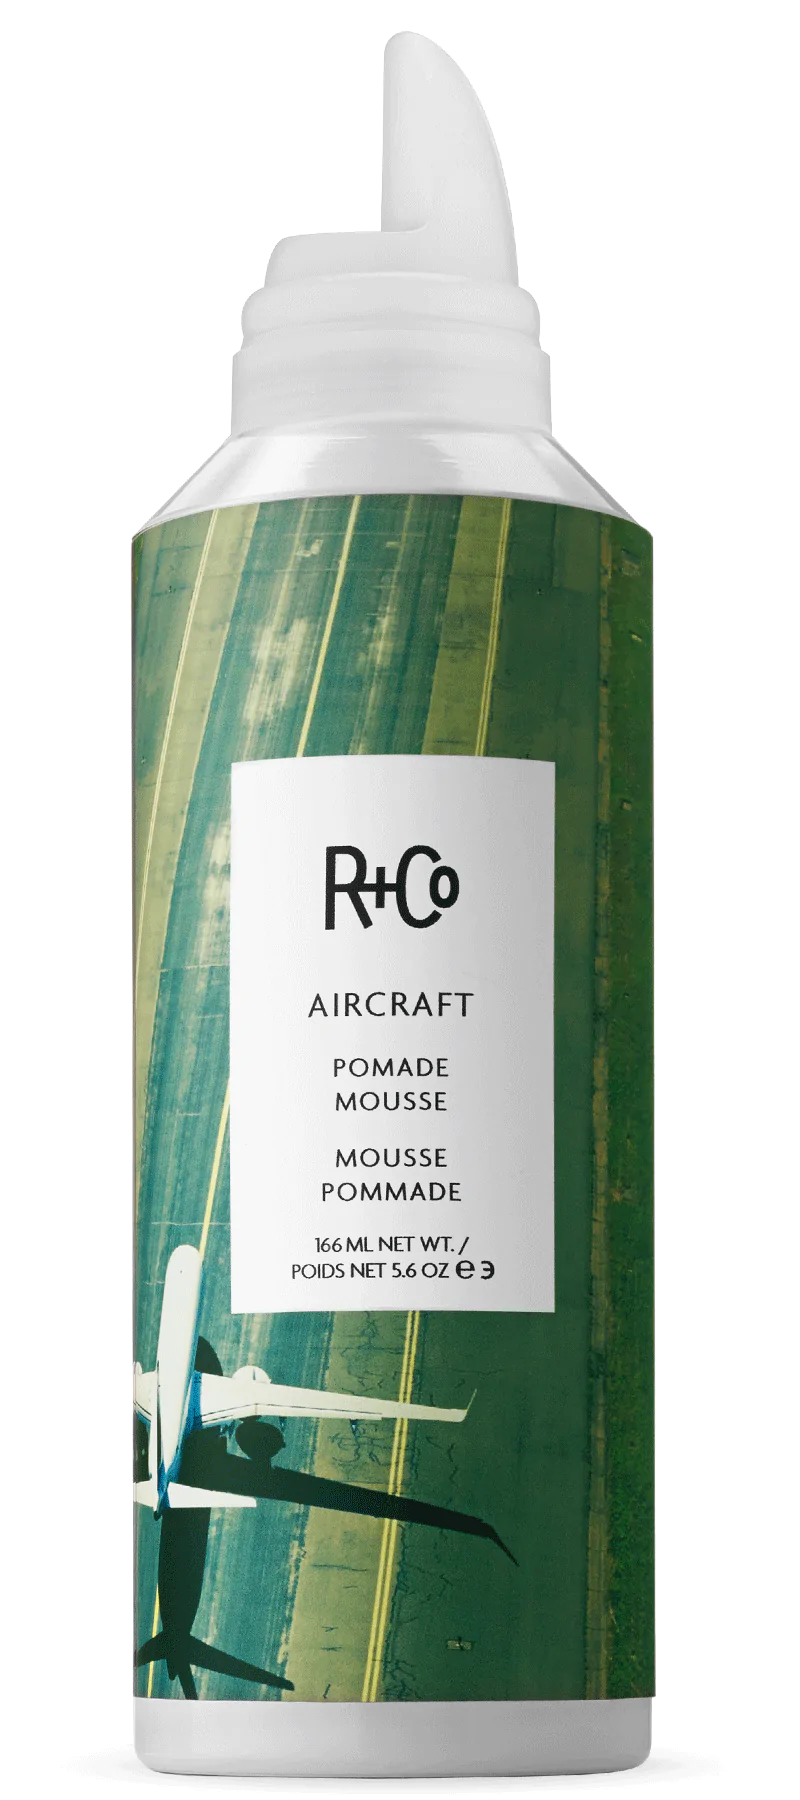 R + Co Aircraft Pomade Mousse